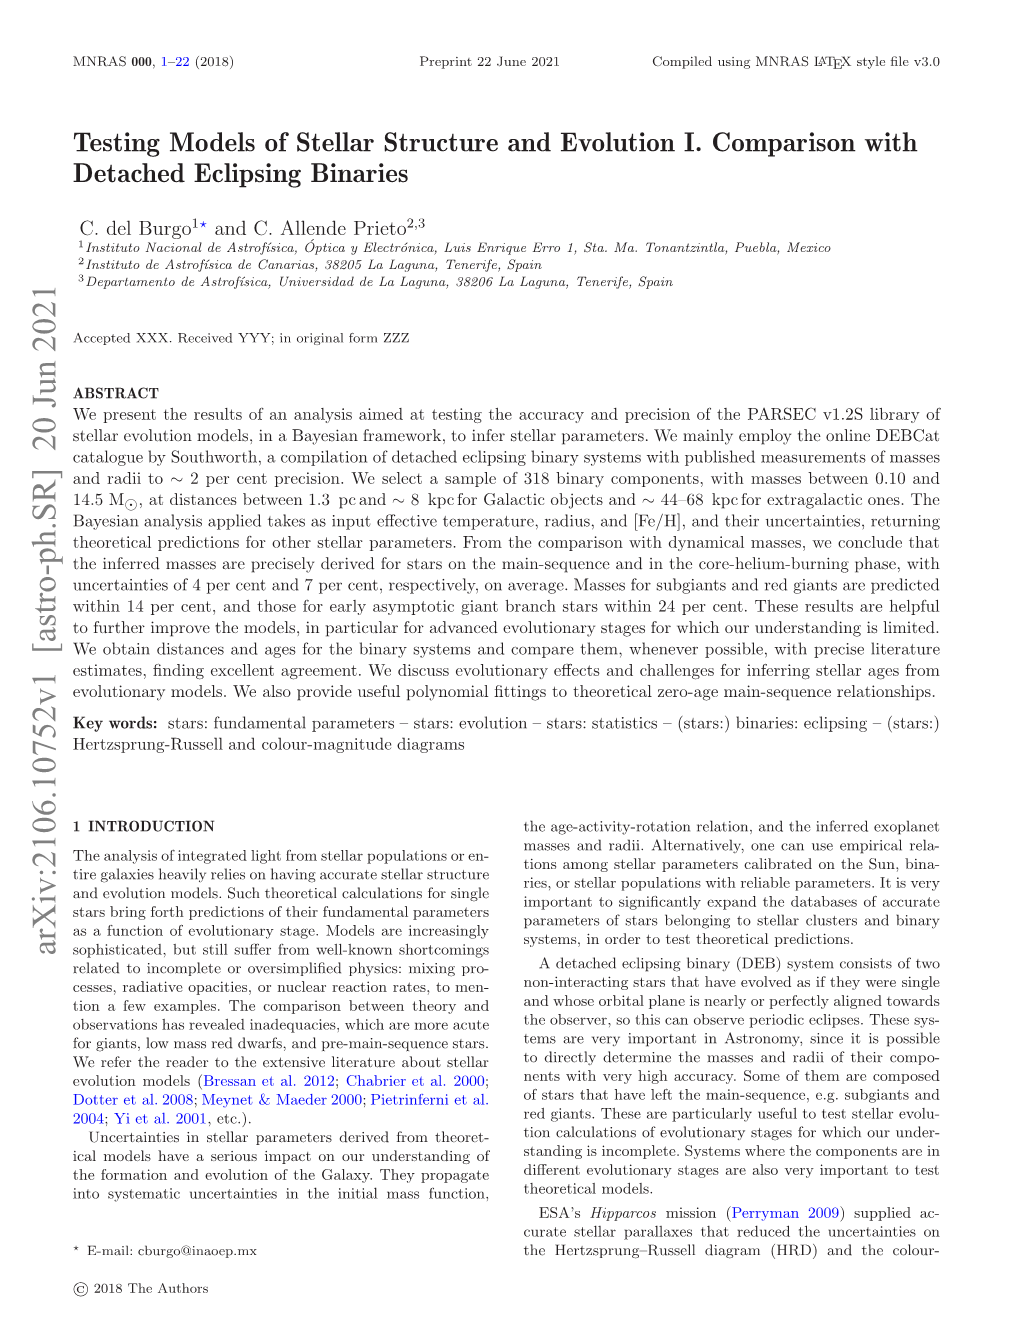 Testing Models of Stellar Structure and Evolution I. Comparison with Detached Eclipsing Binaries